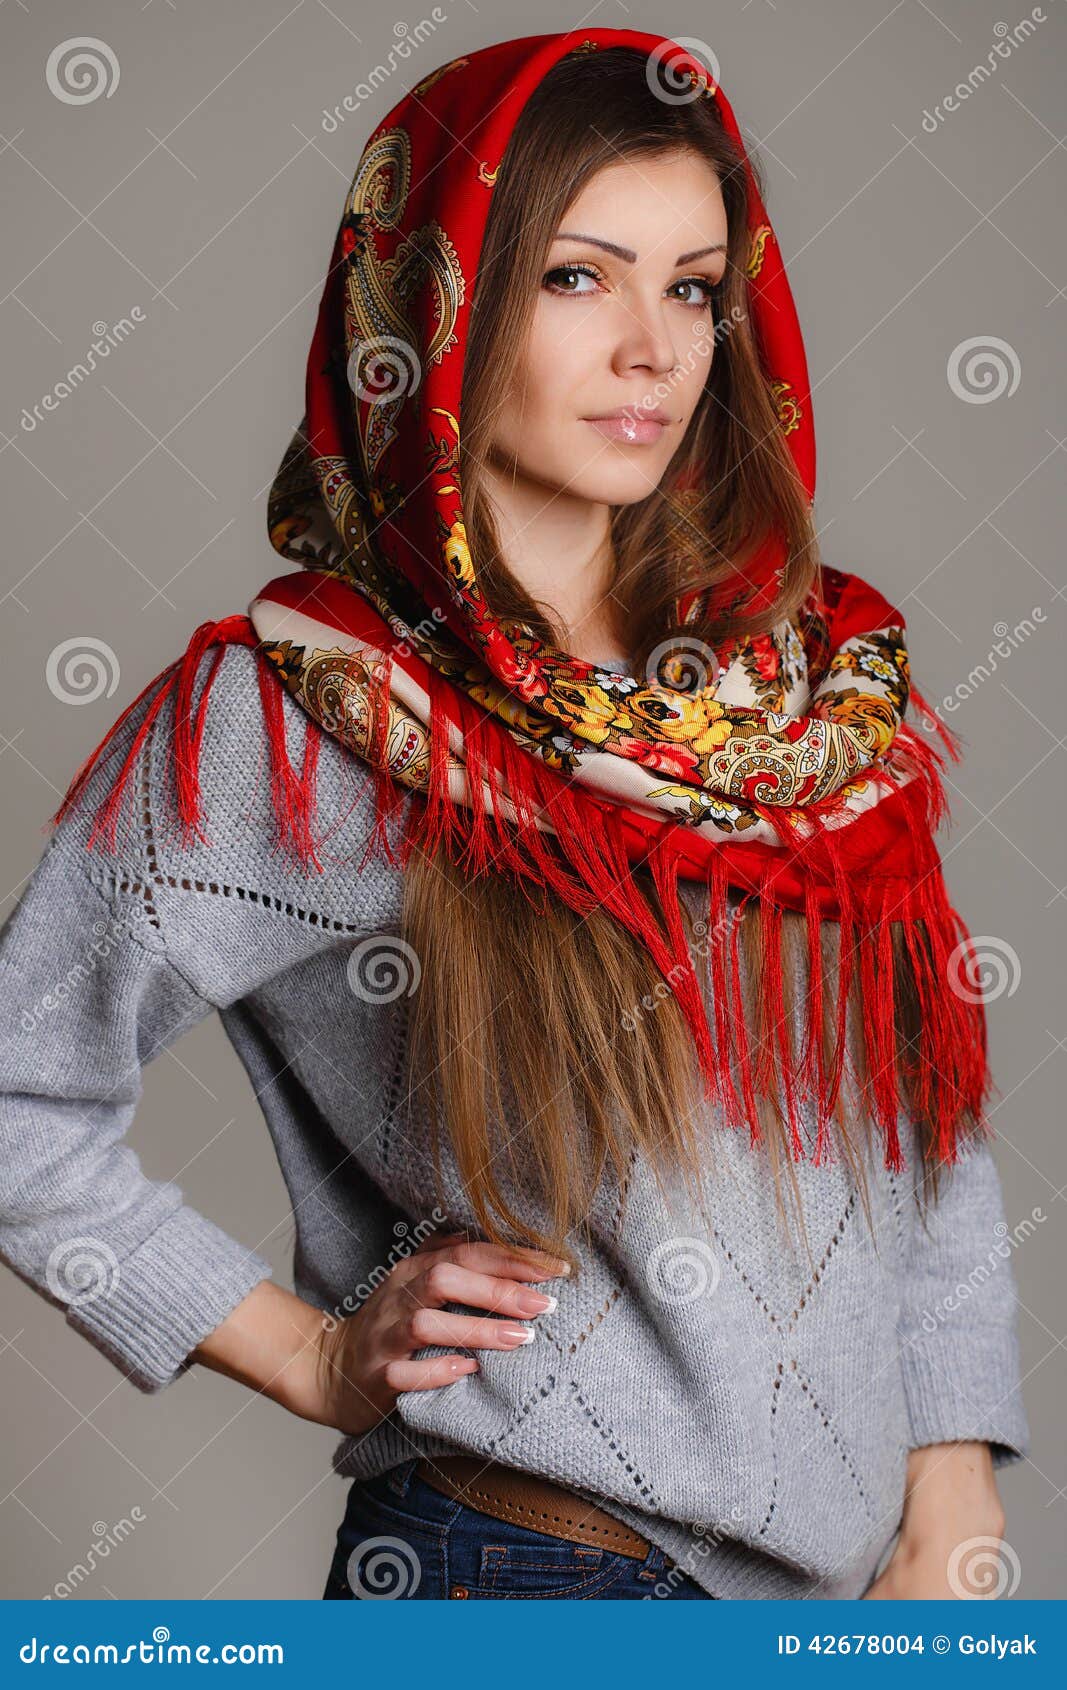 Russian National Traditional Scarf on Your Head Stock Photo - Image of ...